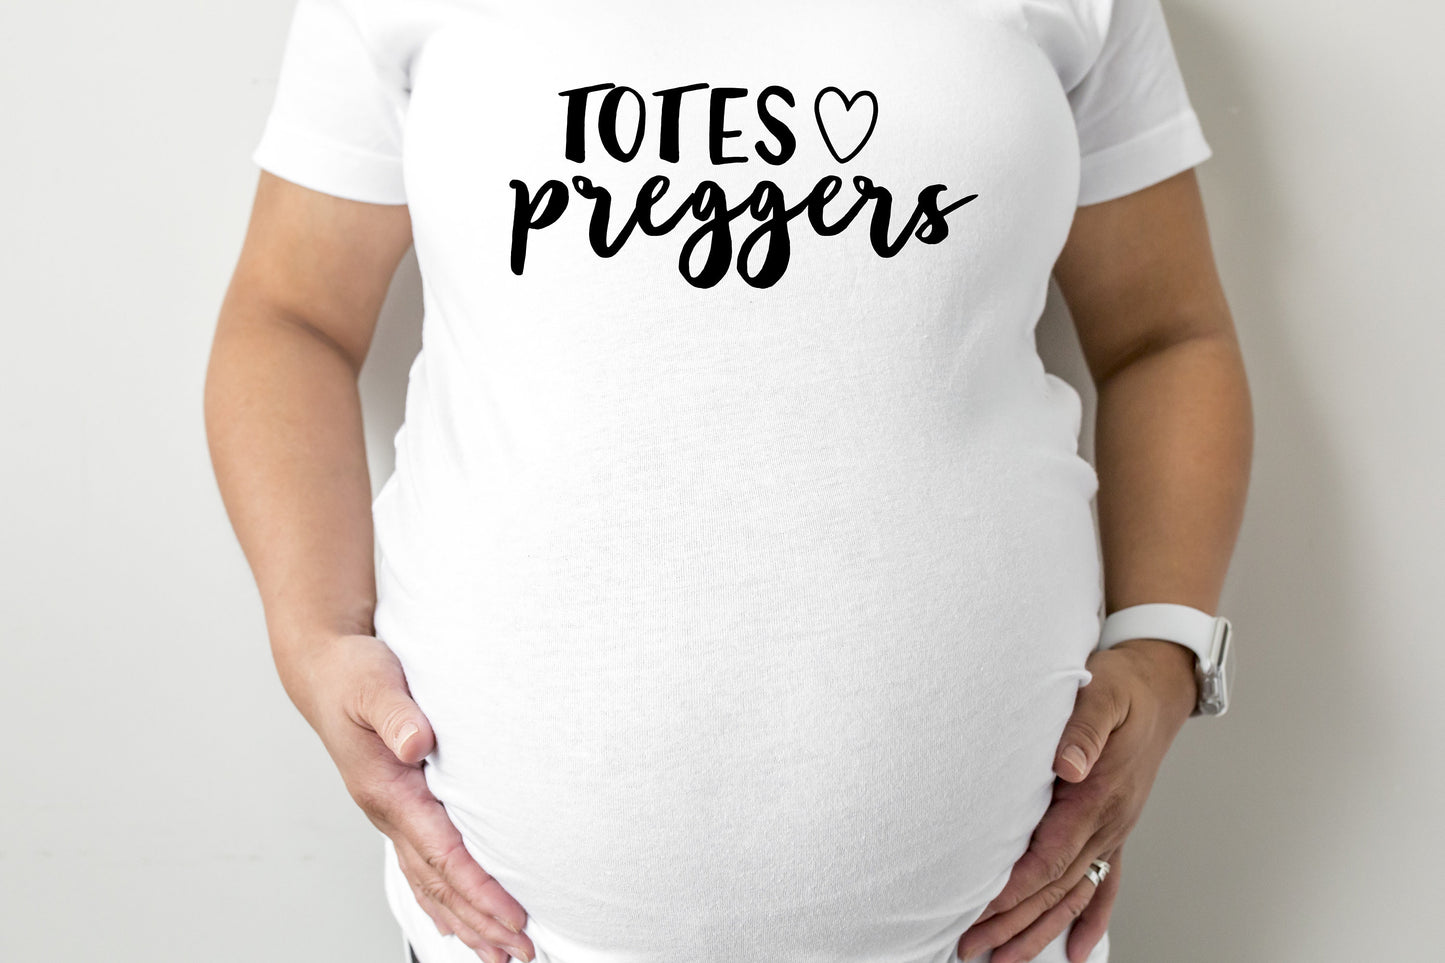 Totes Preggers Maternity T-Shirt - maternity cut shirt with ruched sides - pregnancy announcement - maternity shirt - funny maternity shirt